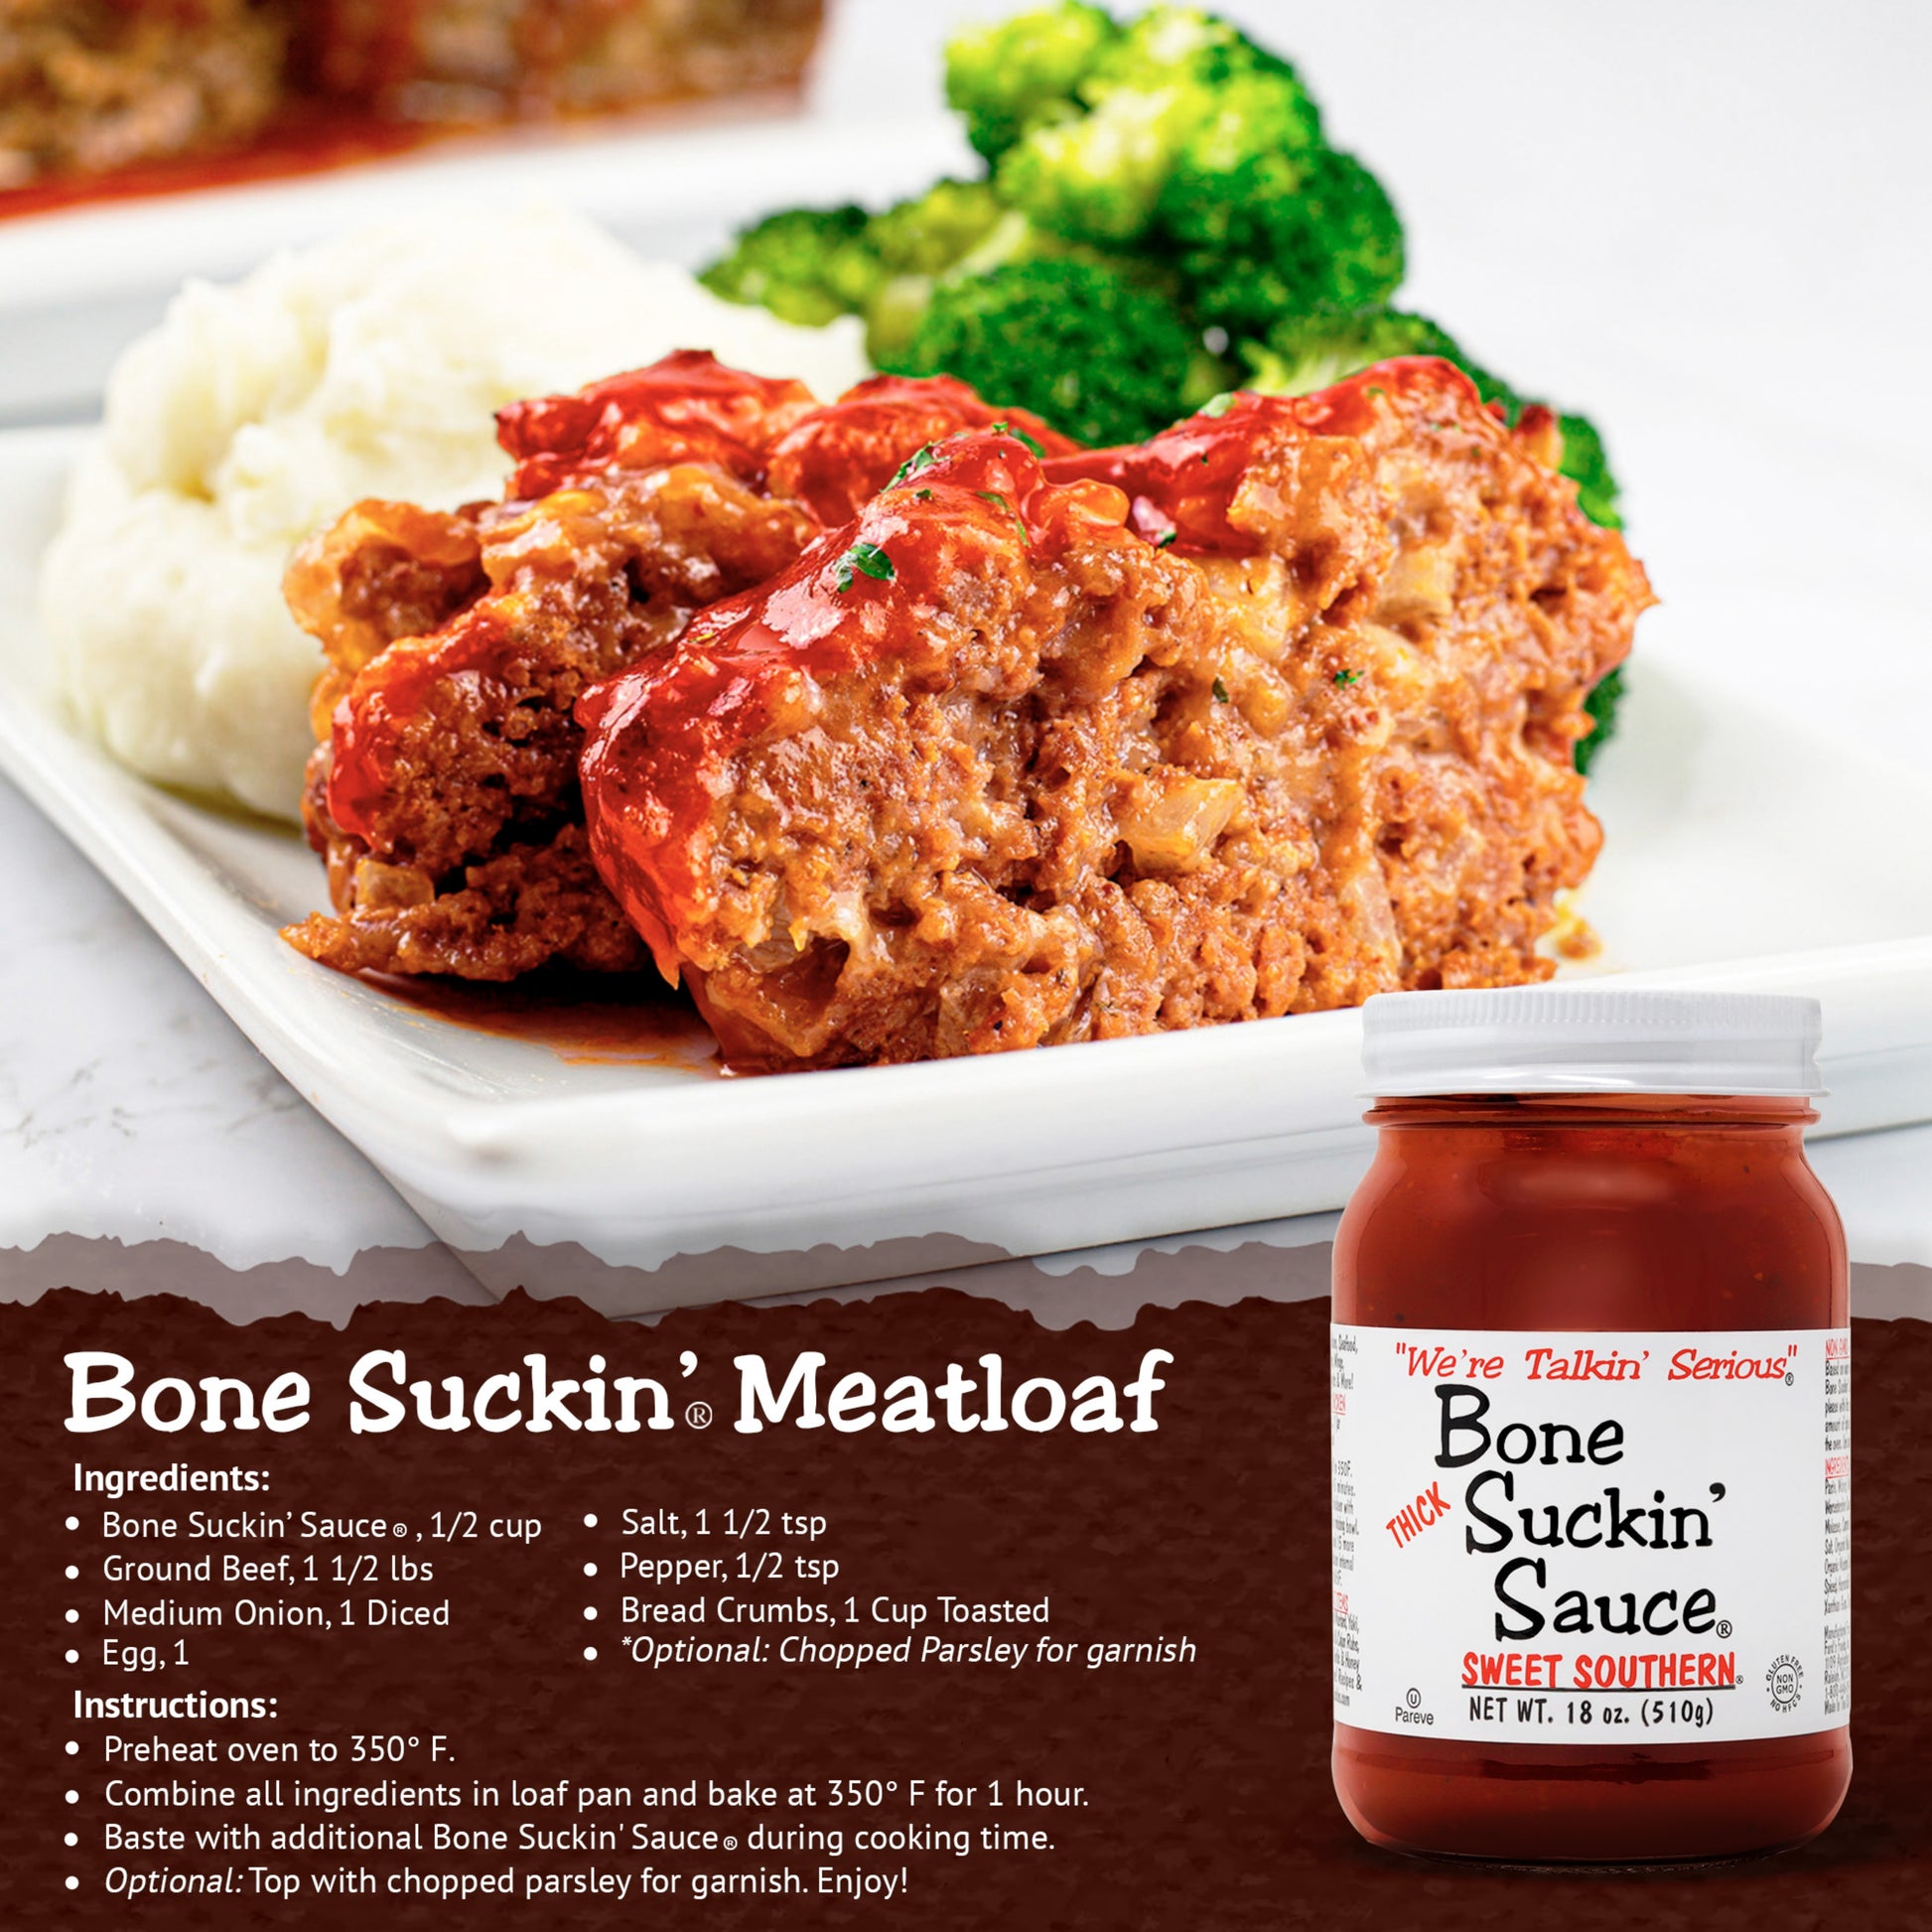 Bone Suckin' Meatloaf: 1/2 cup Bone Suckin’ Sauce®, Spicy Thick, Ground Beef, 1 1/2 lbs, 1/4 cup Onion, Bread Crumbs 1 cup toasted, 1 Egg, 1 1/2 tsp salt, 1/2 tsp pepper. Preheat the oven to 350º F. Combine all ingredients together, thoroughly. Put the mixture into a loaf pan. Baste with additional Bone Suckin’® Sauce during cooking time. Bake in the oven for 1 hour or until done. Recipe serves 4-6. Enjoy!